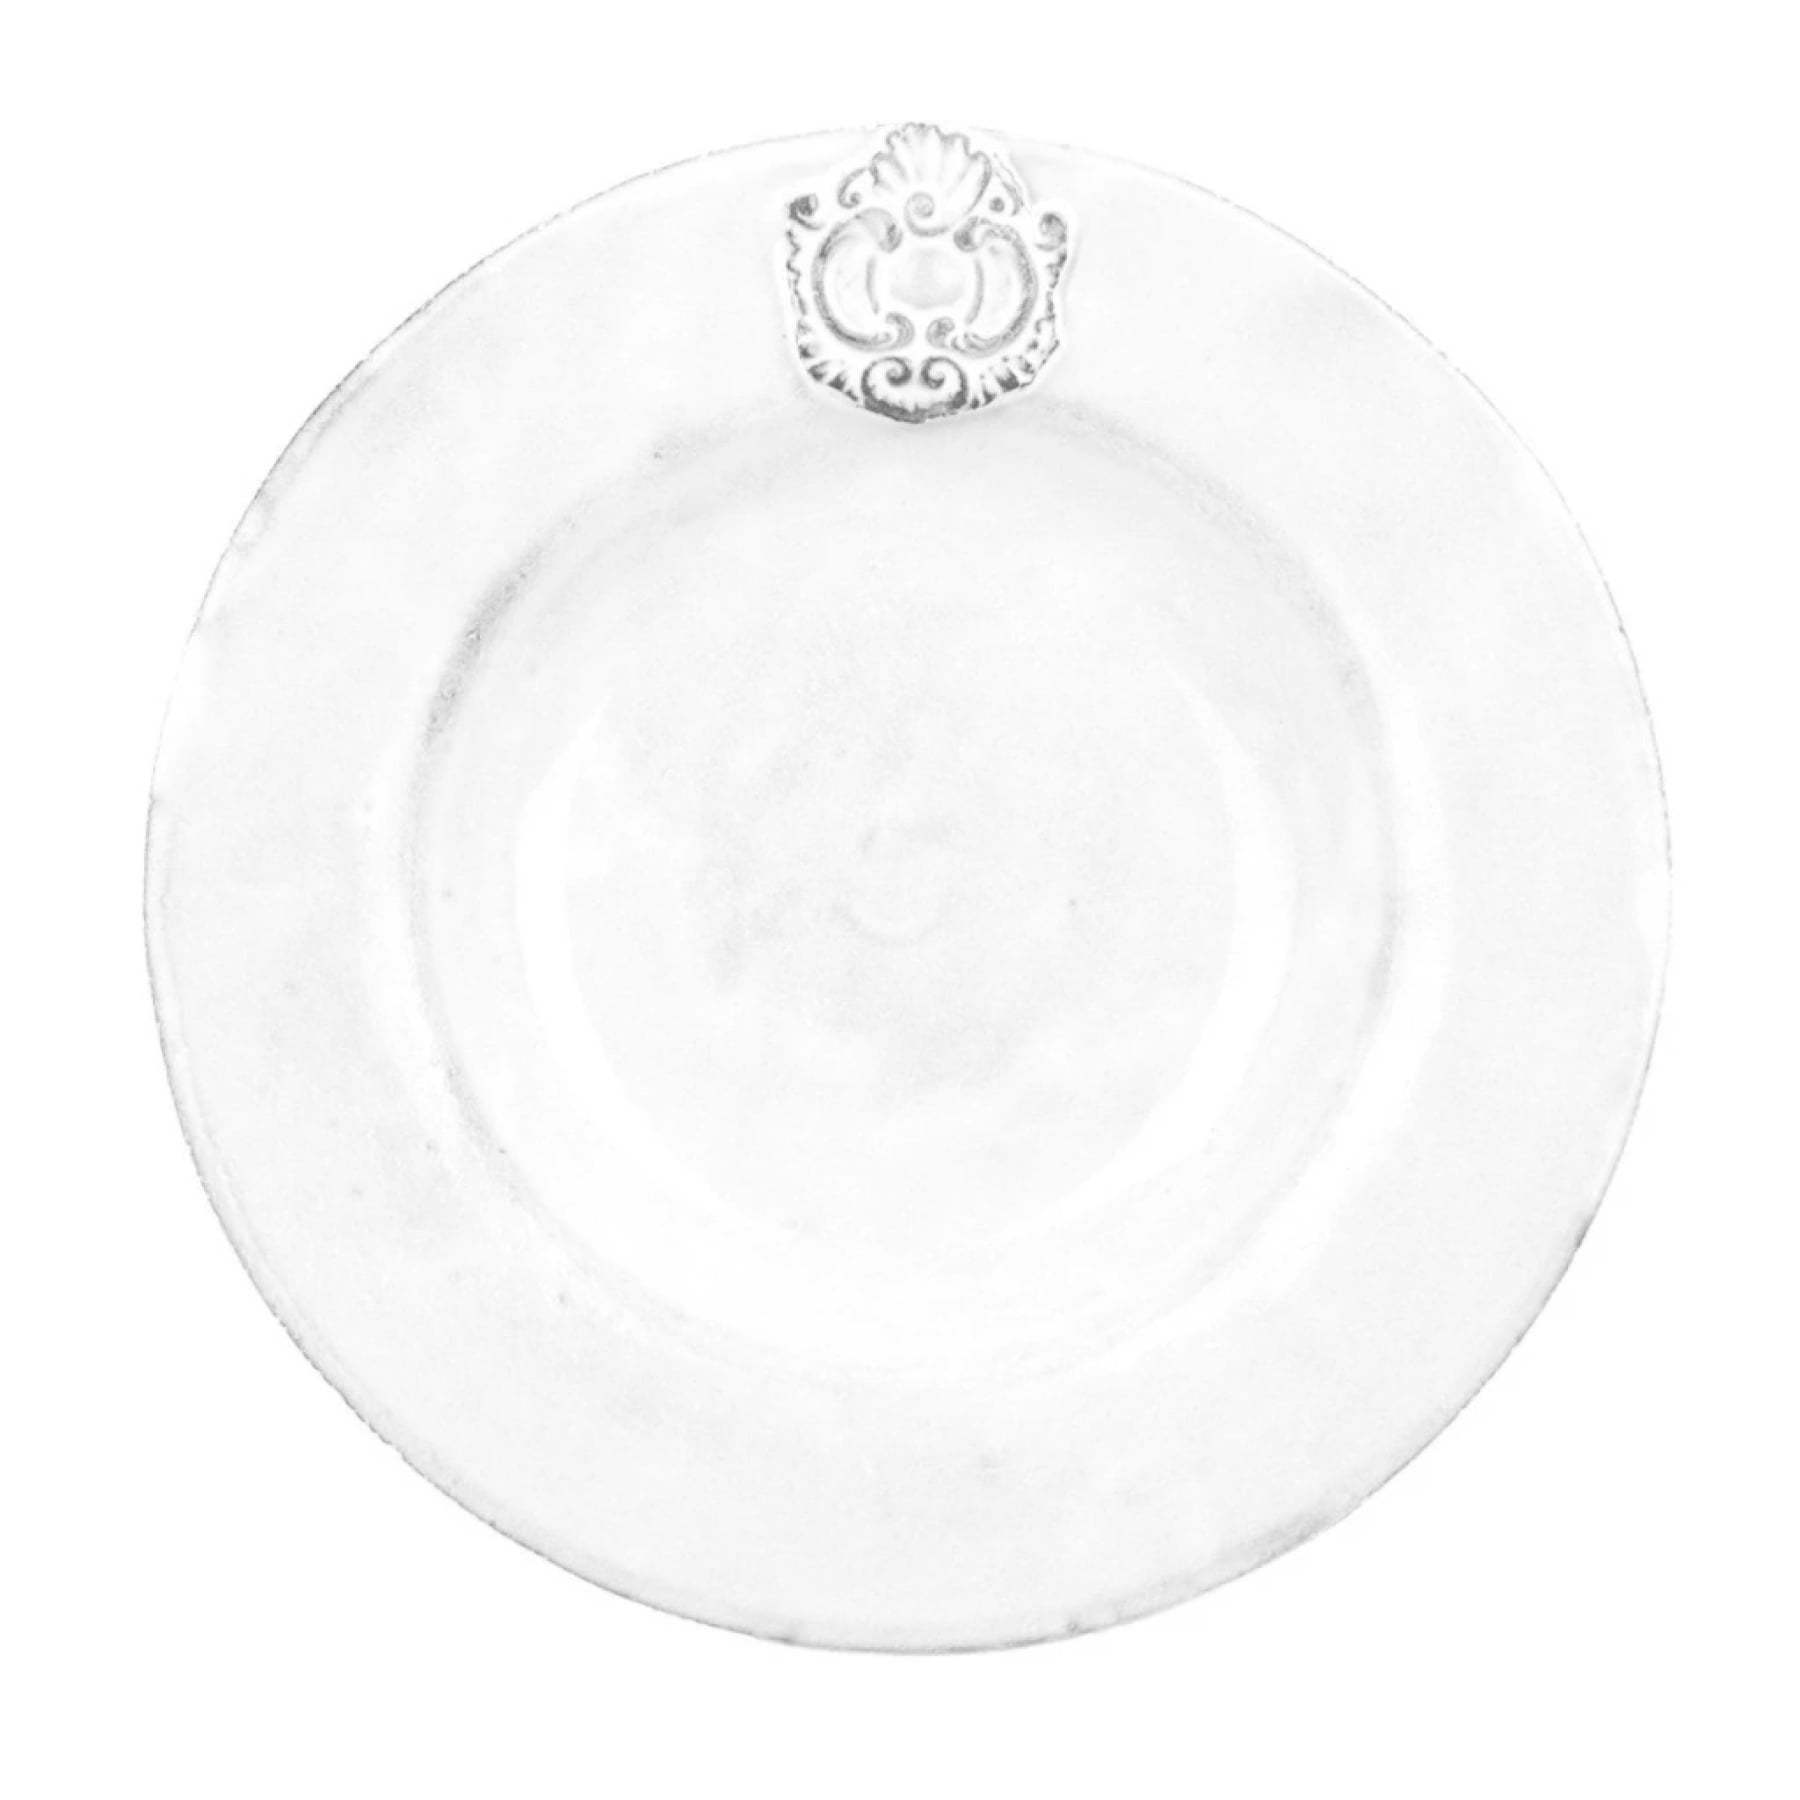 Charles plate-Shallow plate S ⌀21-Handmade in France by CARRON